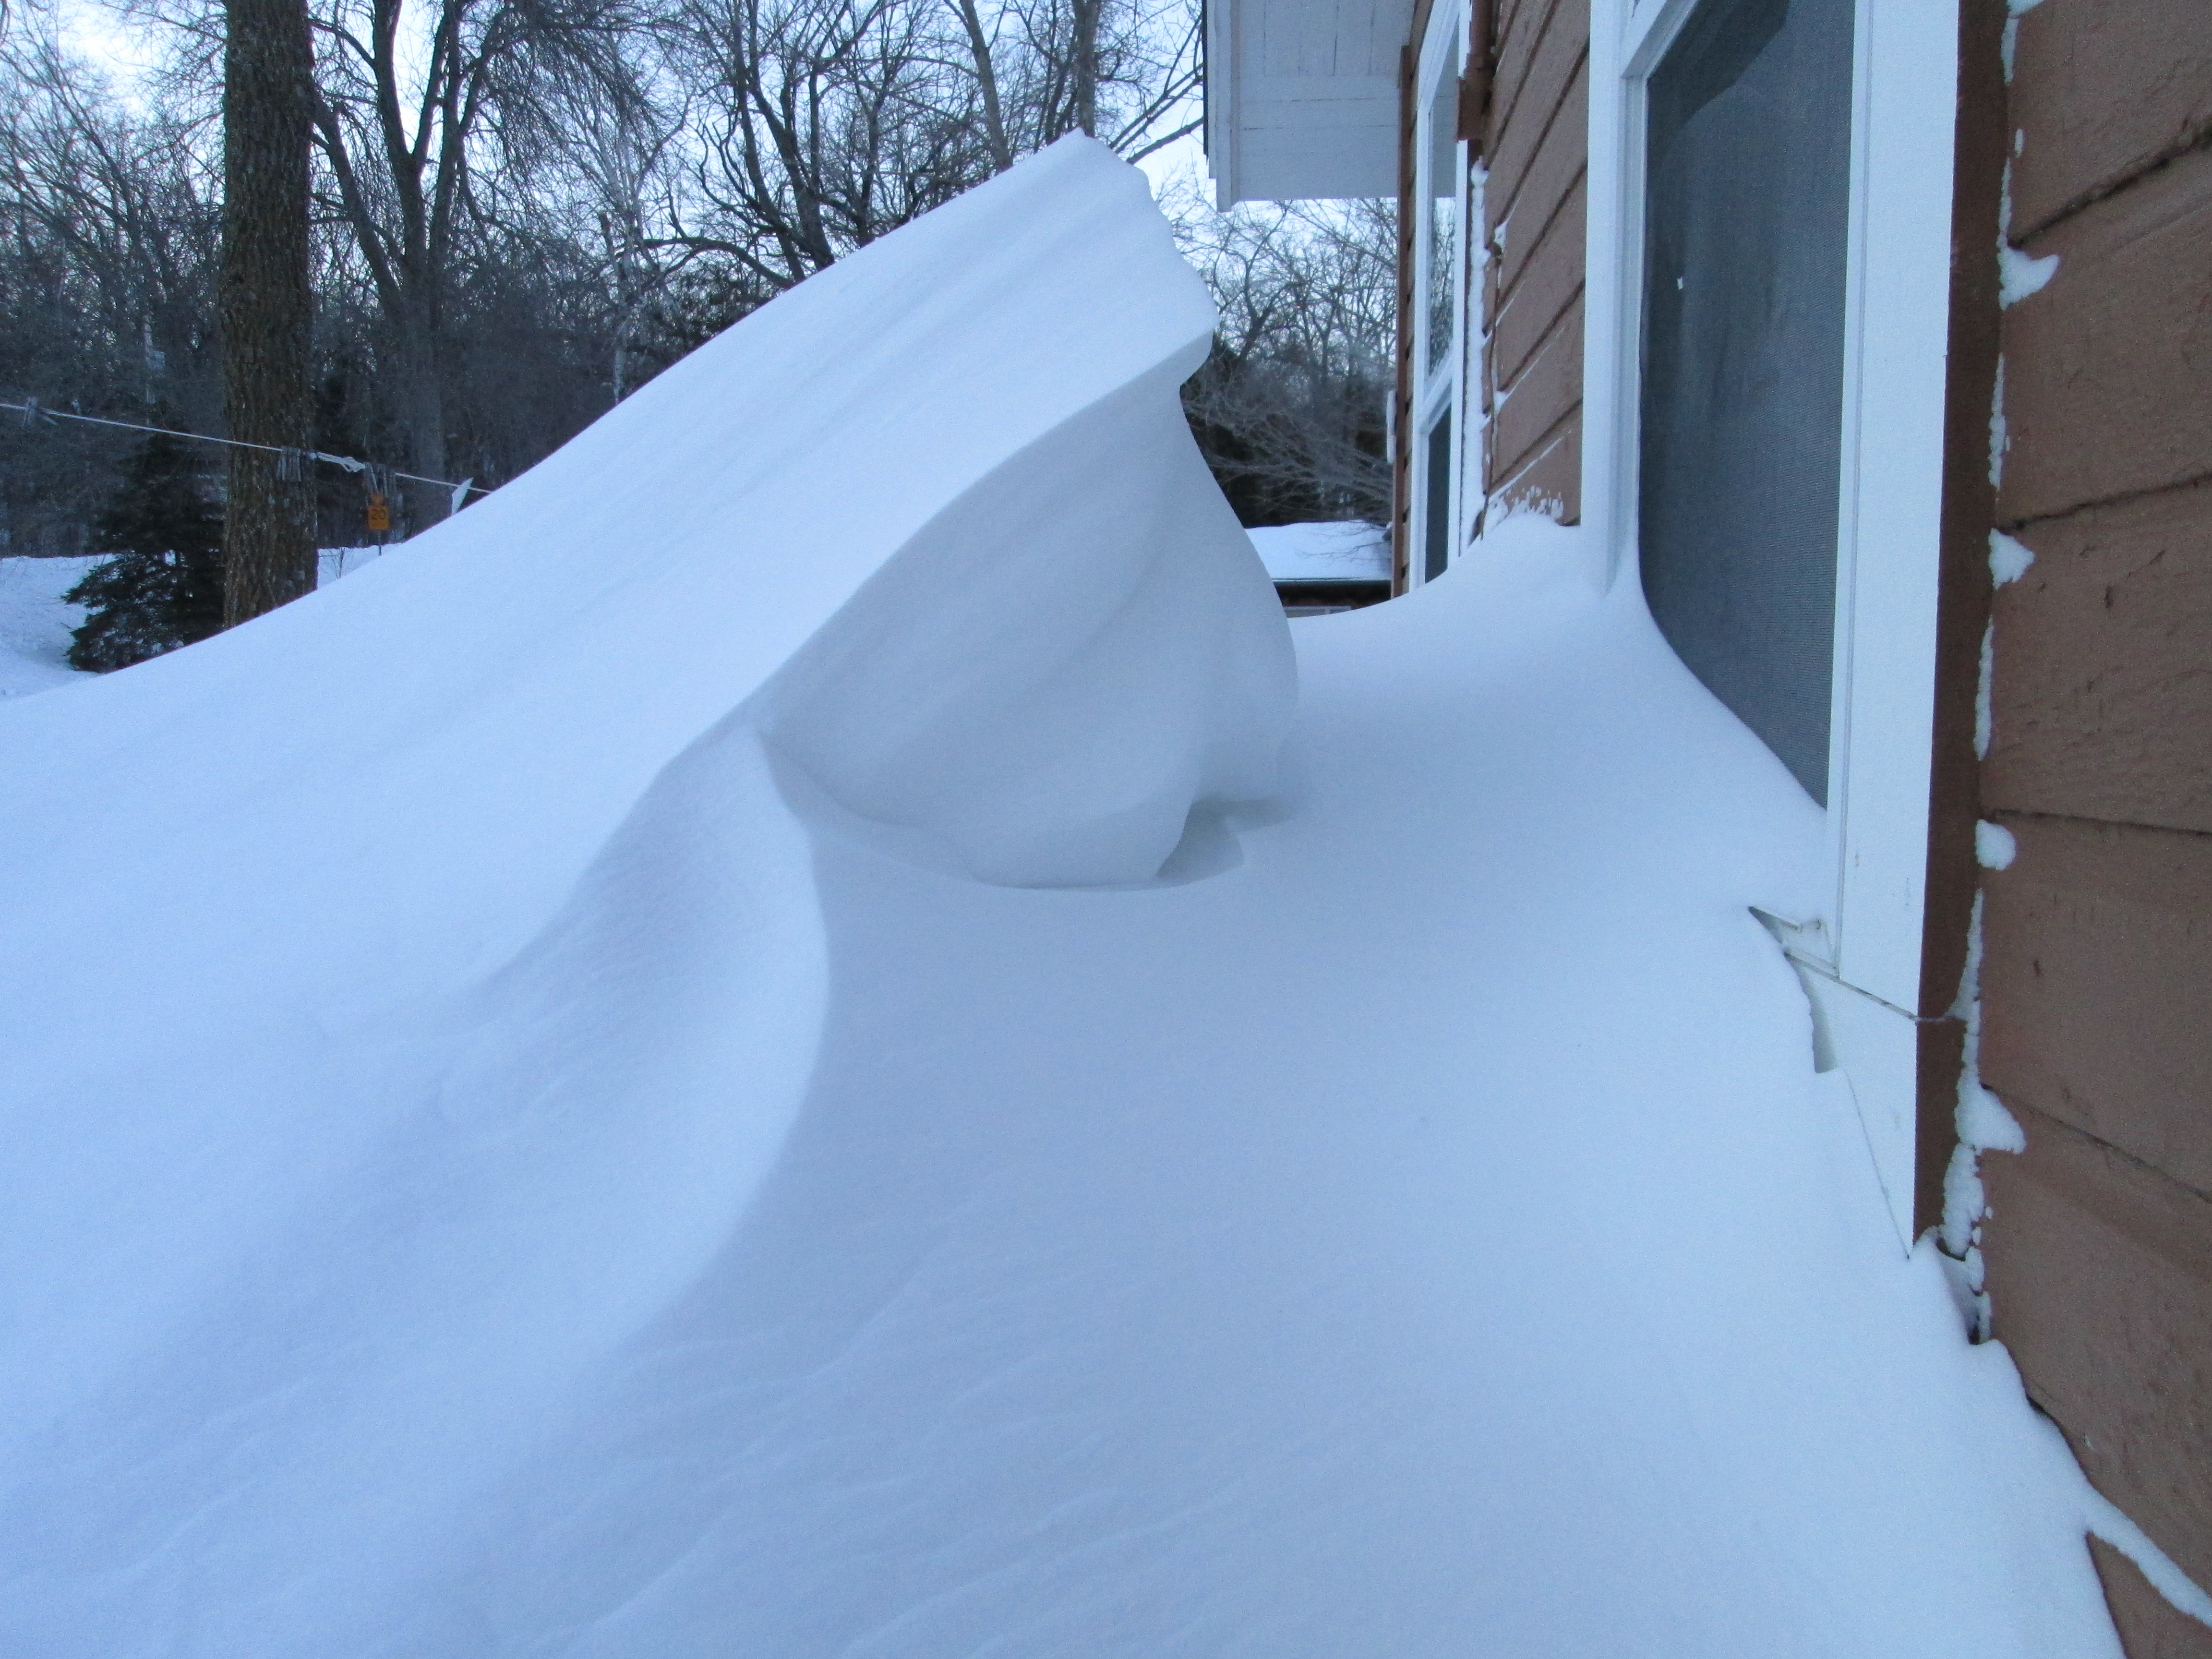 More snow drifts at the resort